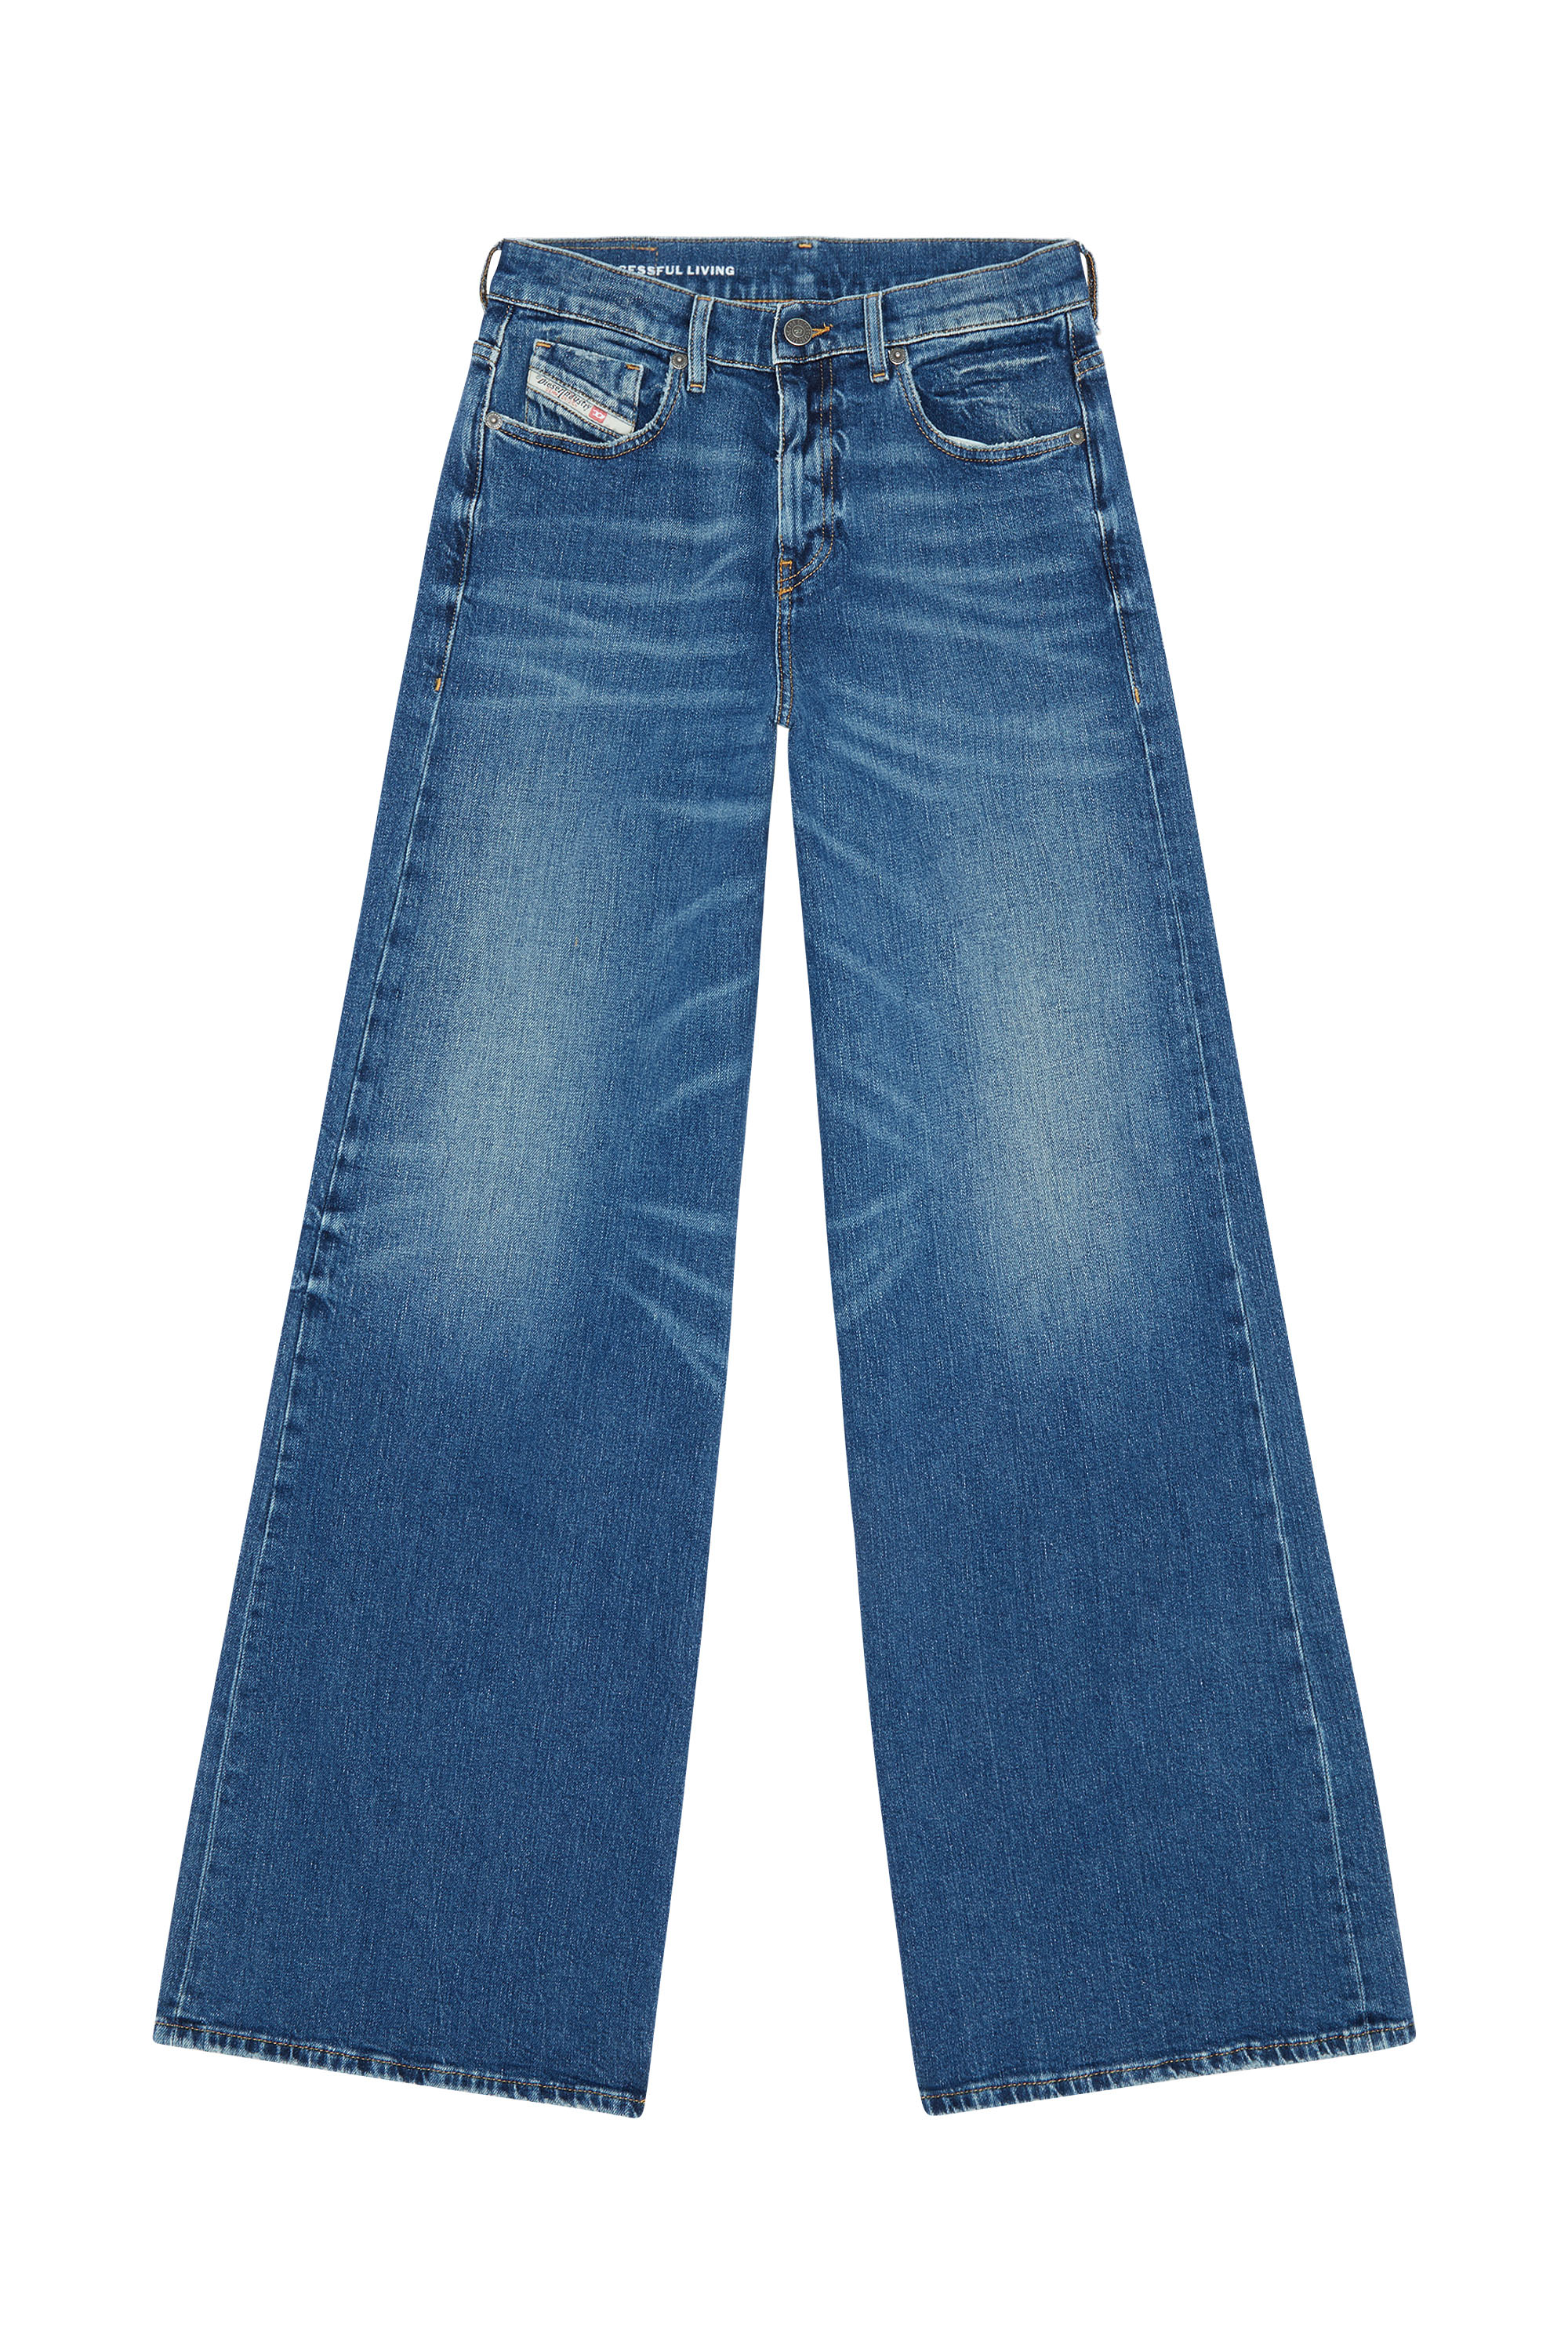 1978 007L1 Bootcut and Flare Jeans, Medium blue - Jeans